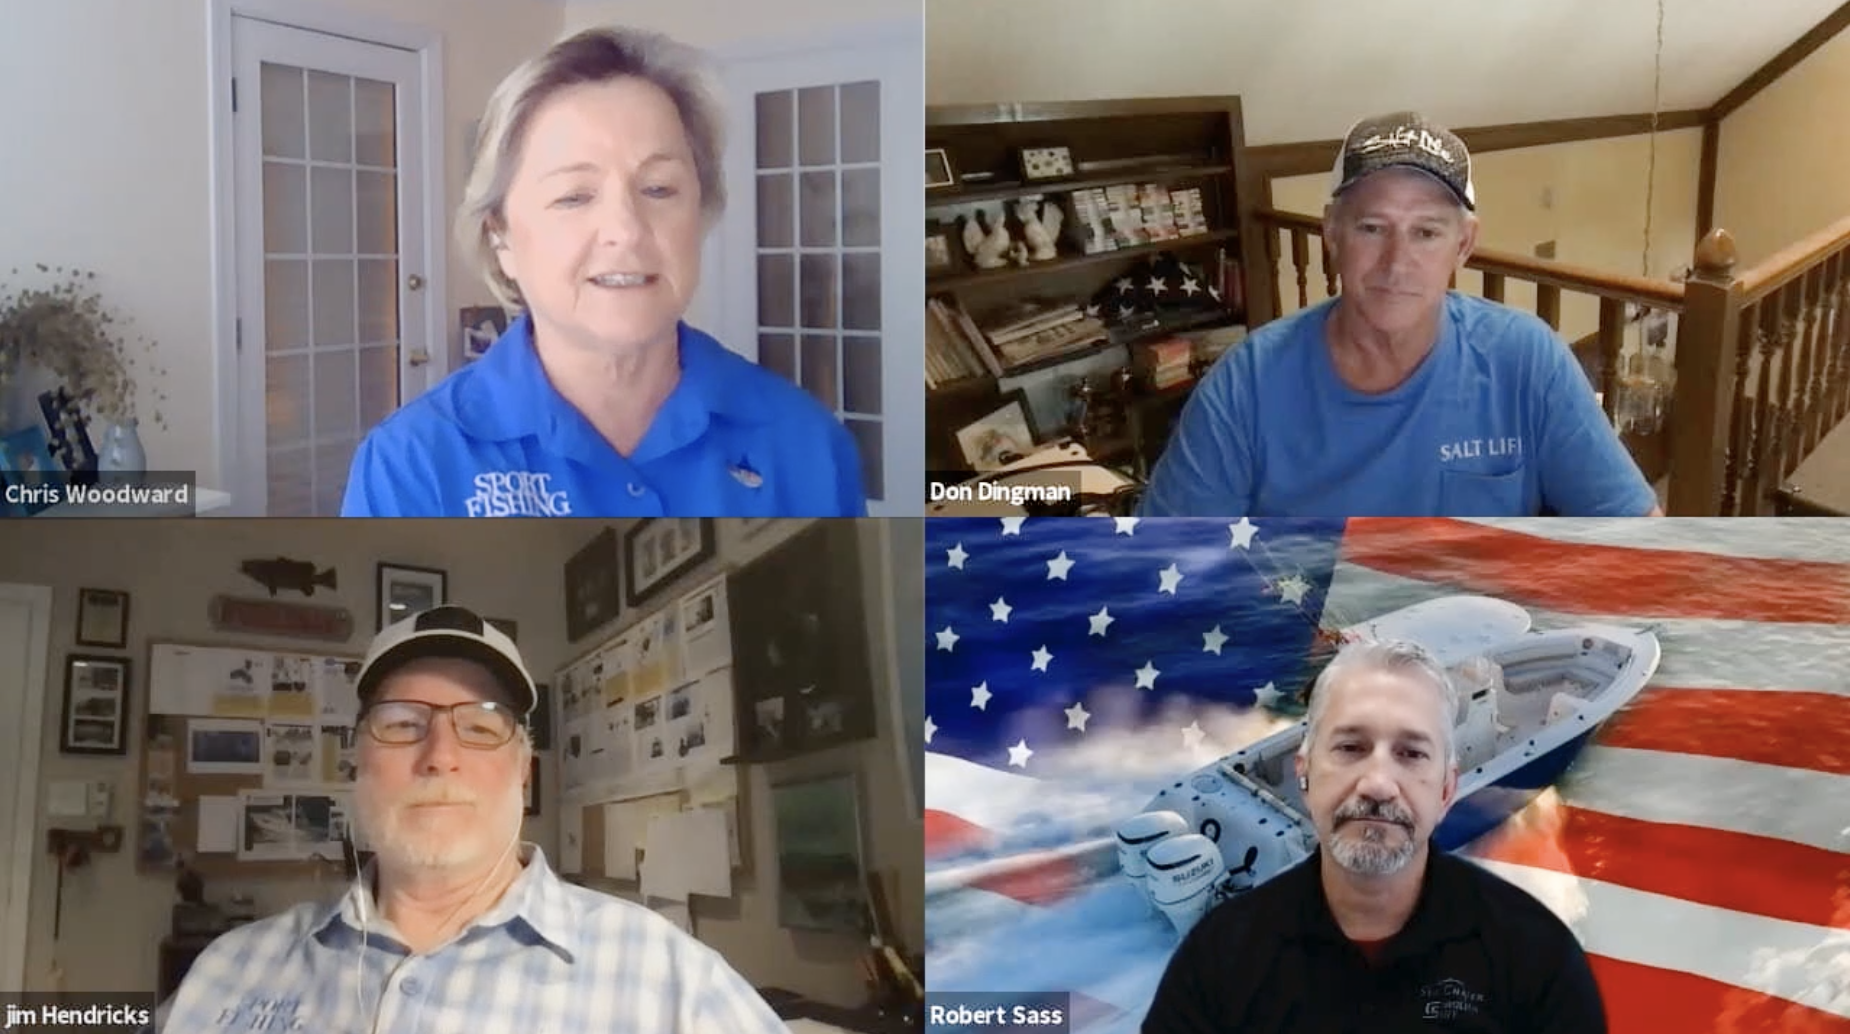 Sport Fishing with Carolina Skiff on their Fishing' Roundtable call